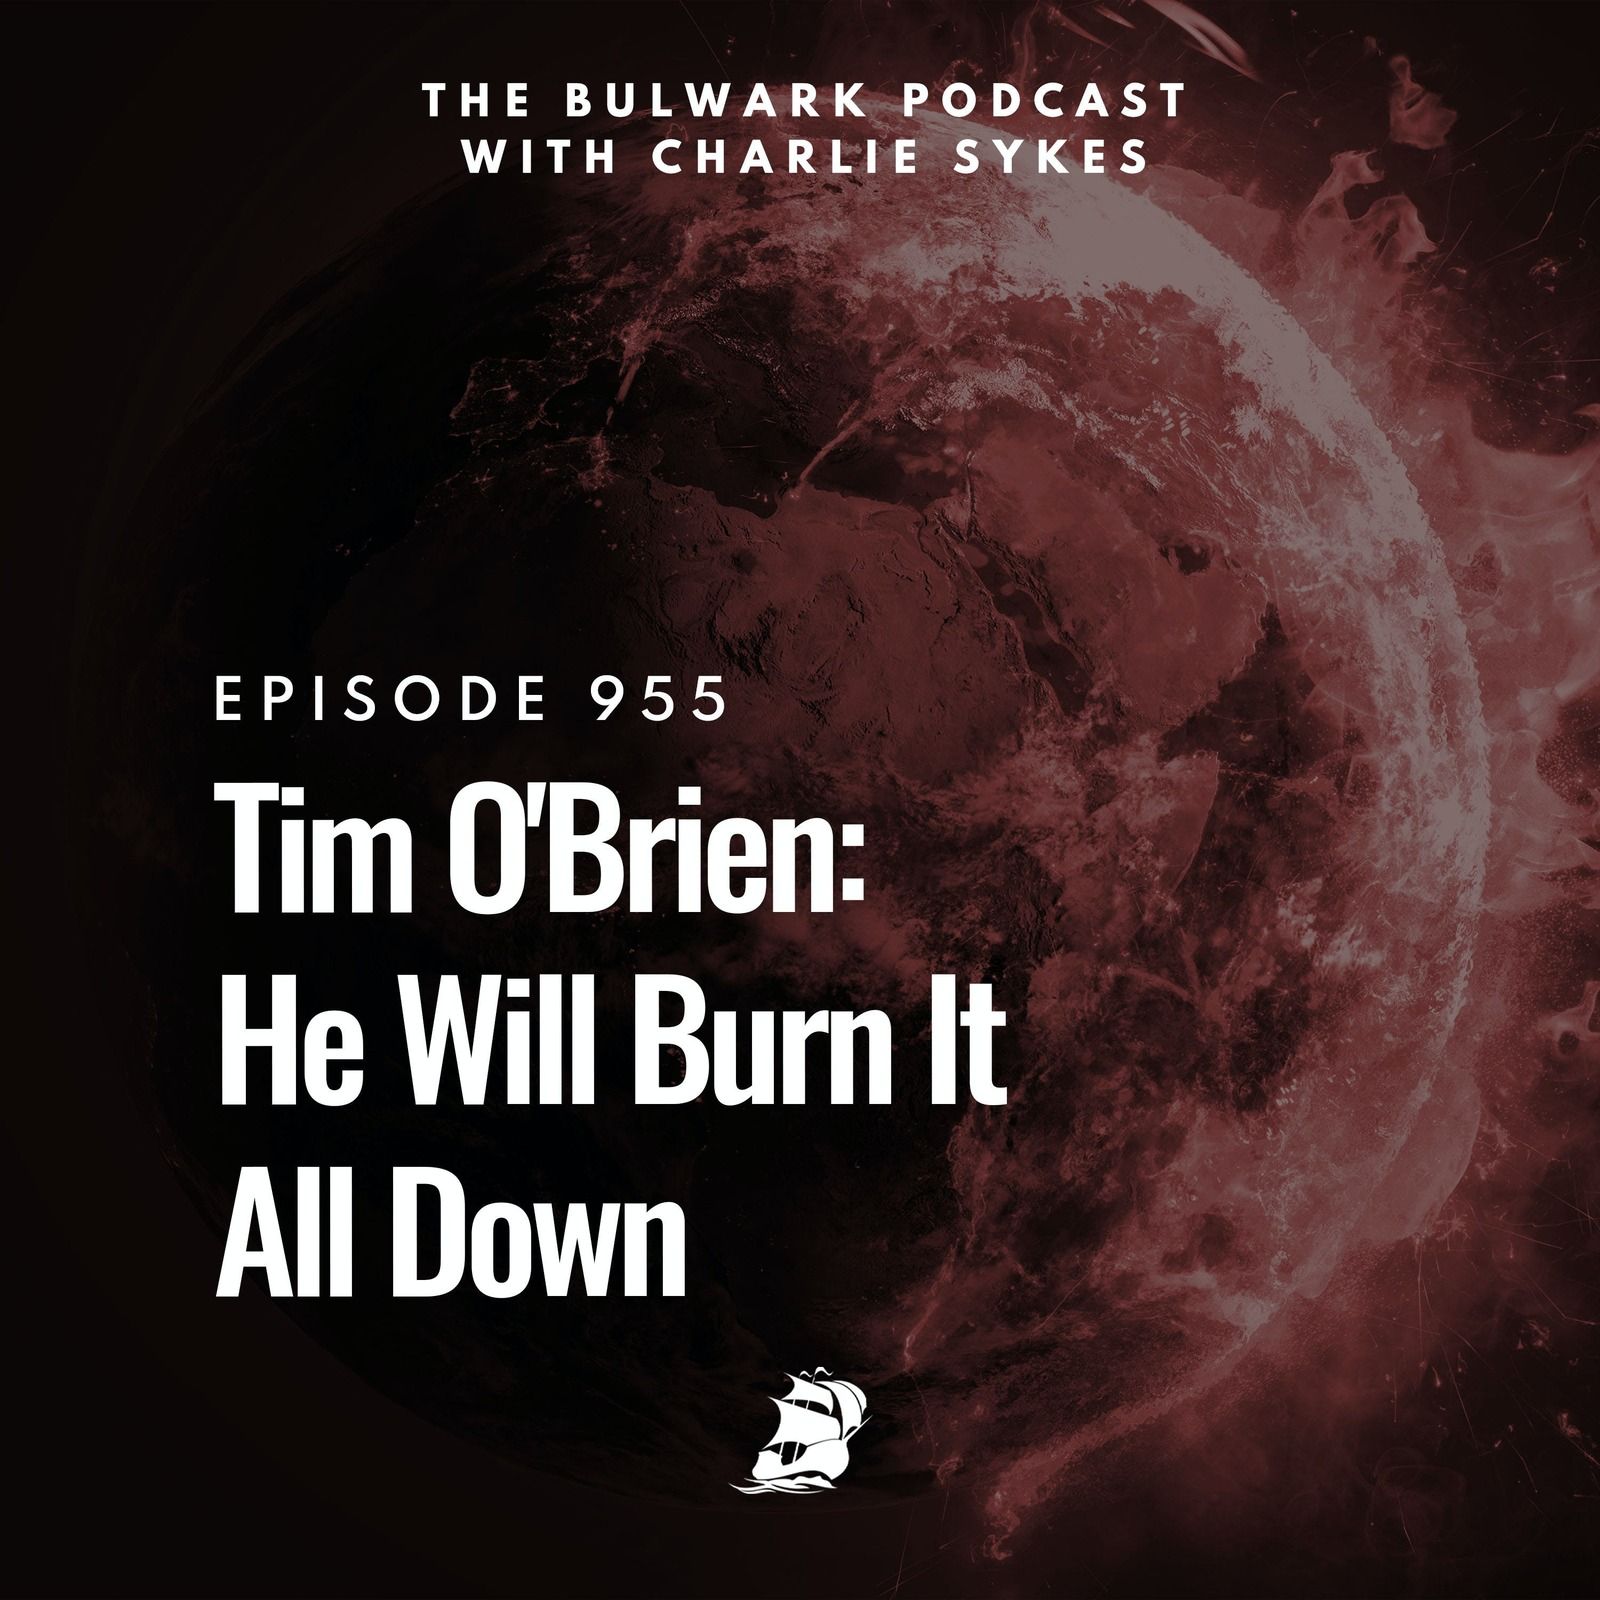 Tim O'Brien: He Will Burn It All Down by The Bulwark Podcast